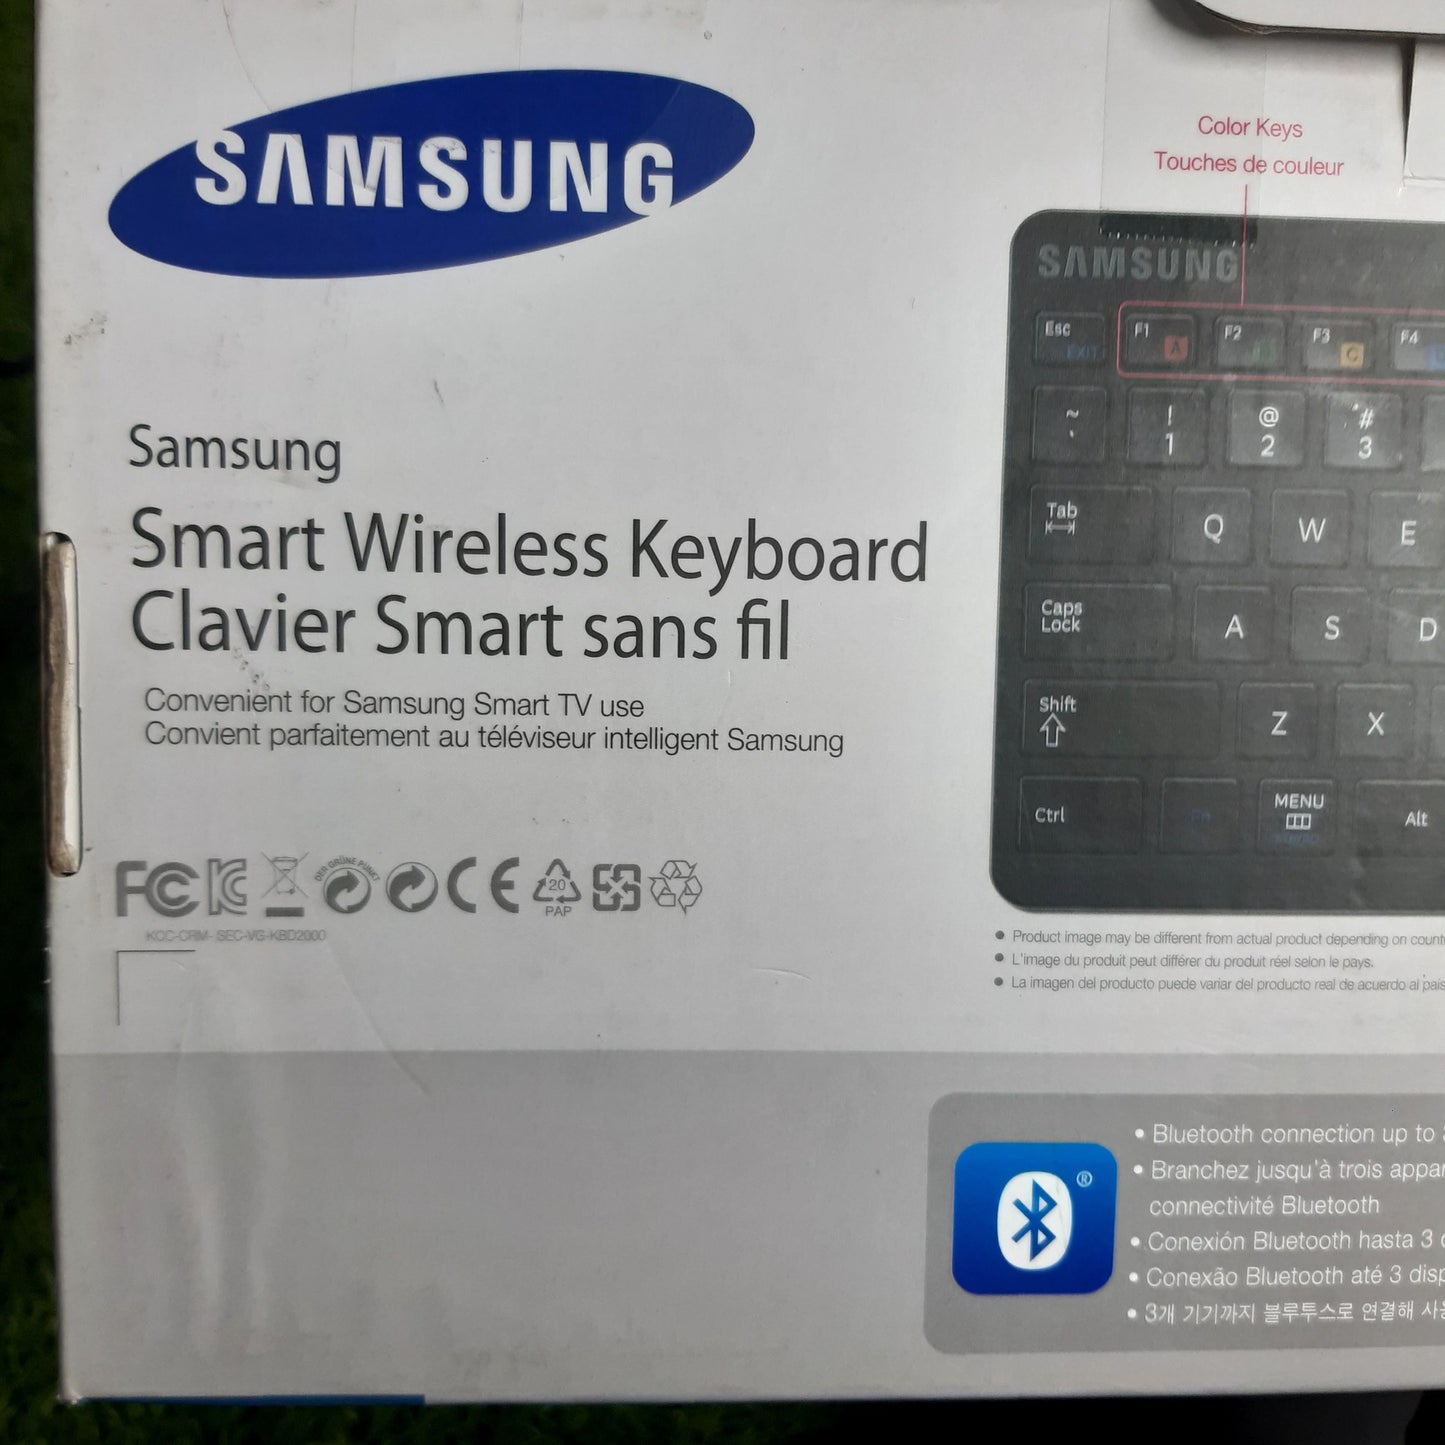 Samsung Smart Keyboard and Mouse Pad